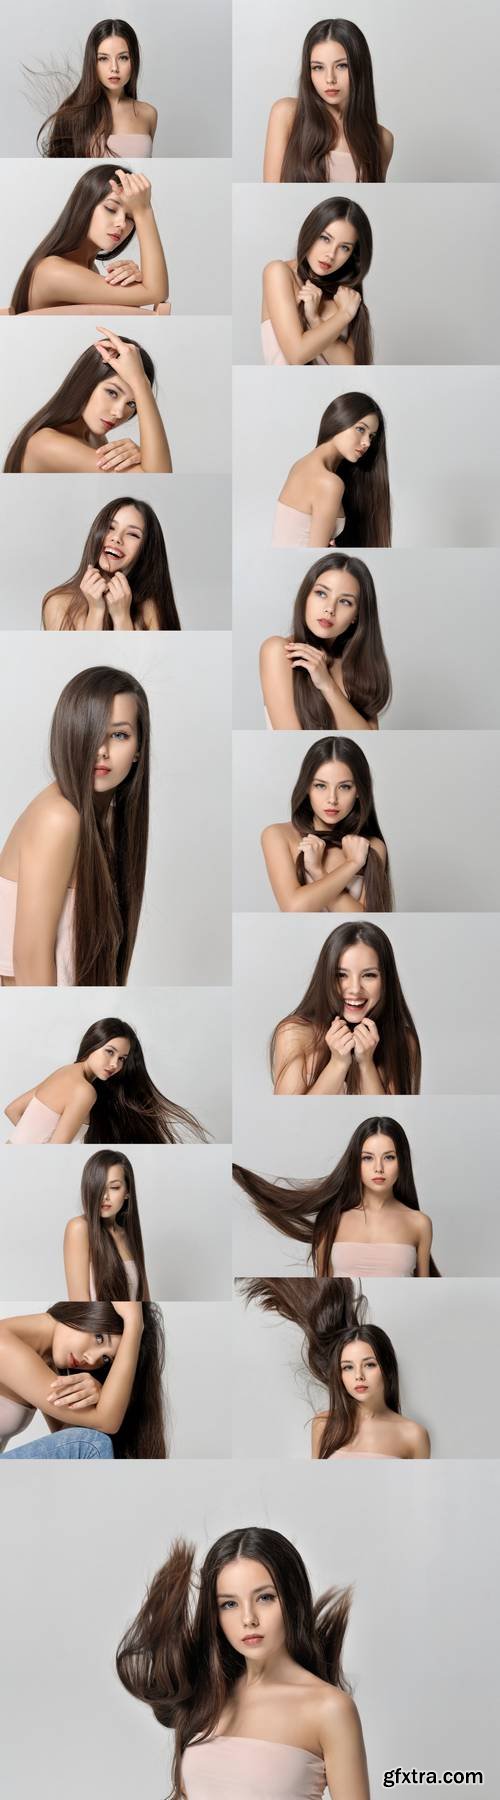 Beautiful Girl - Concept Skin Care and Hair